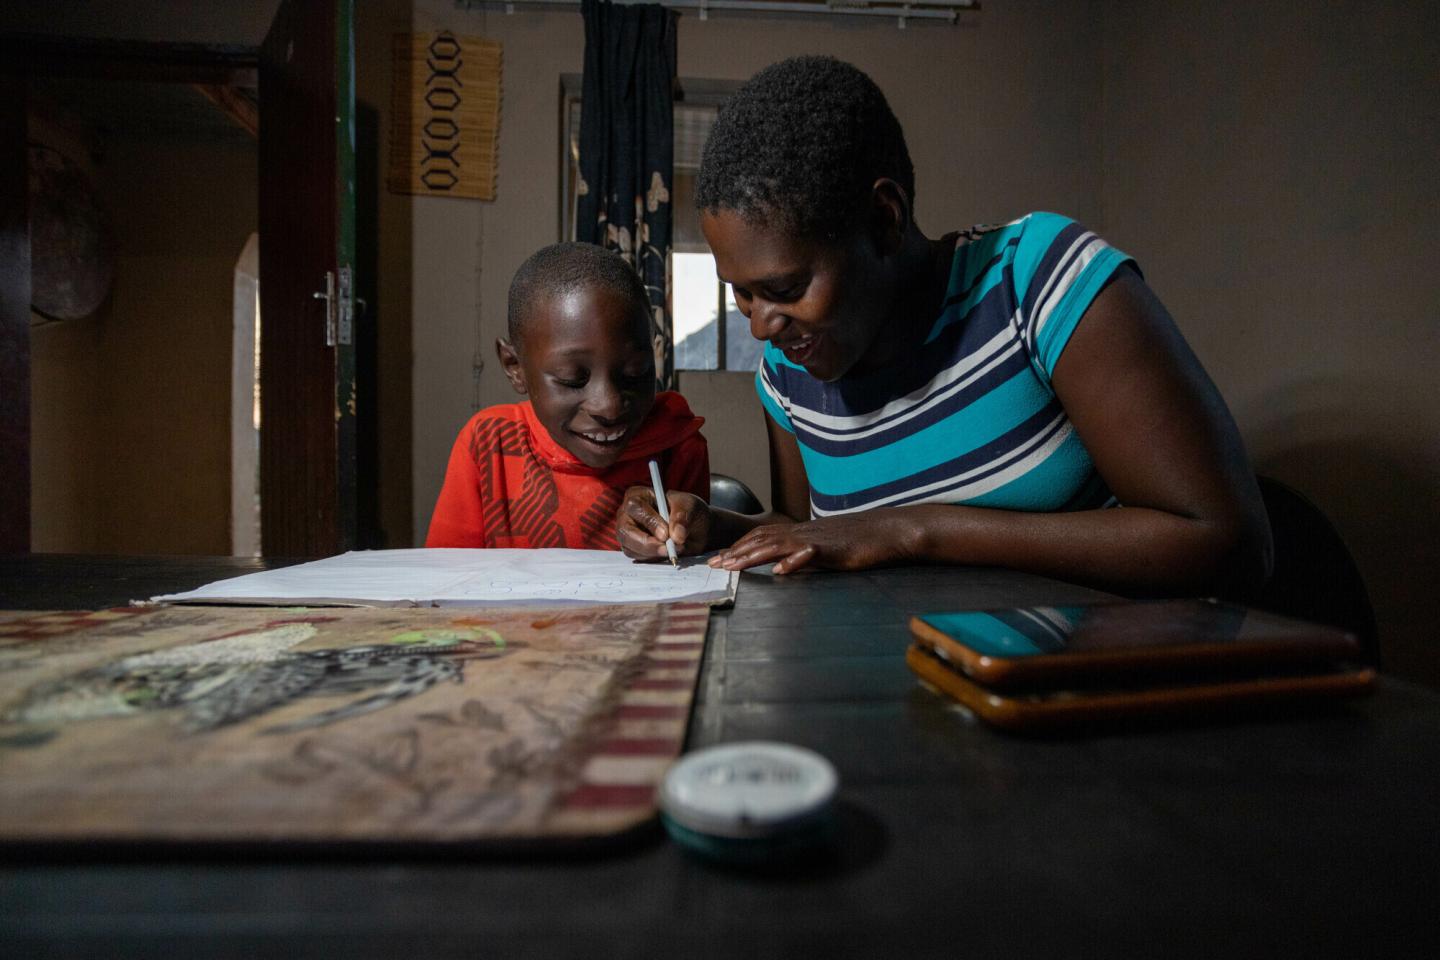 A mother helps her son with his homework at a table.